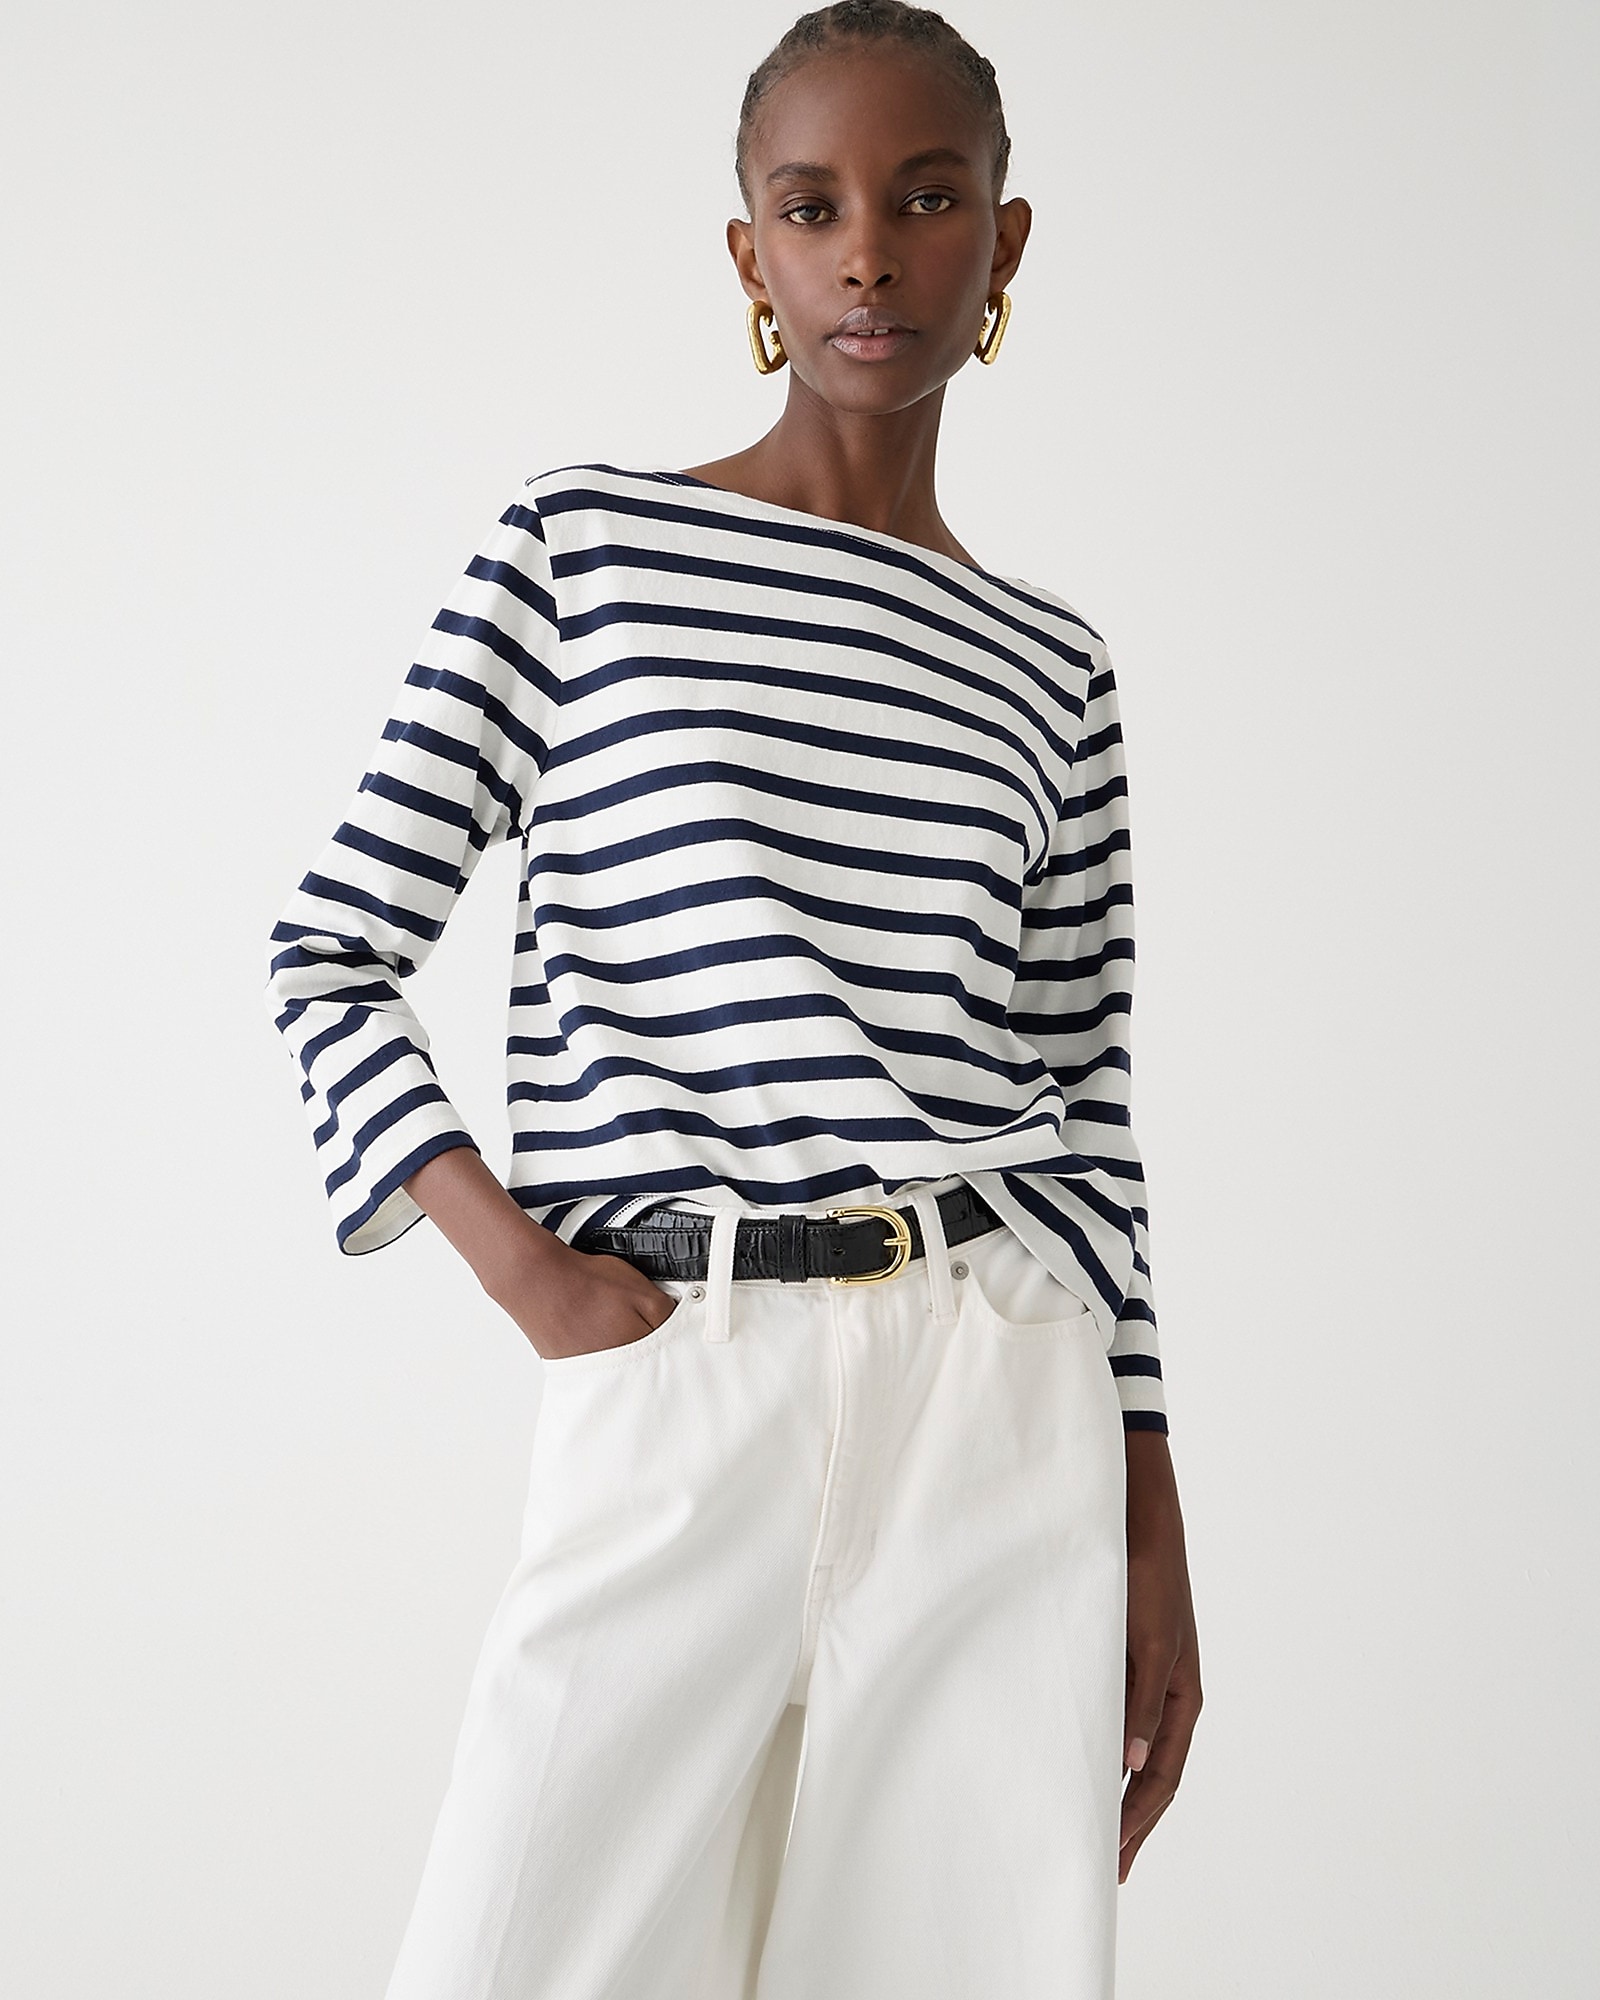 Classic mariner cloth boatneck T-shirt in stripe